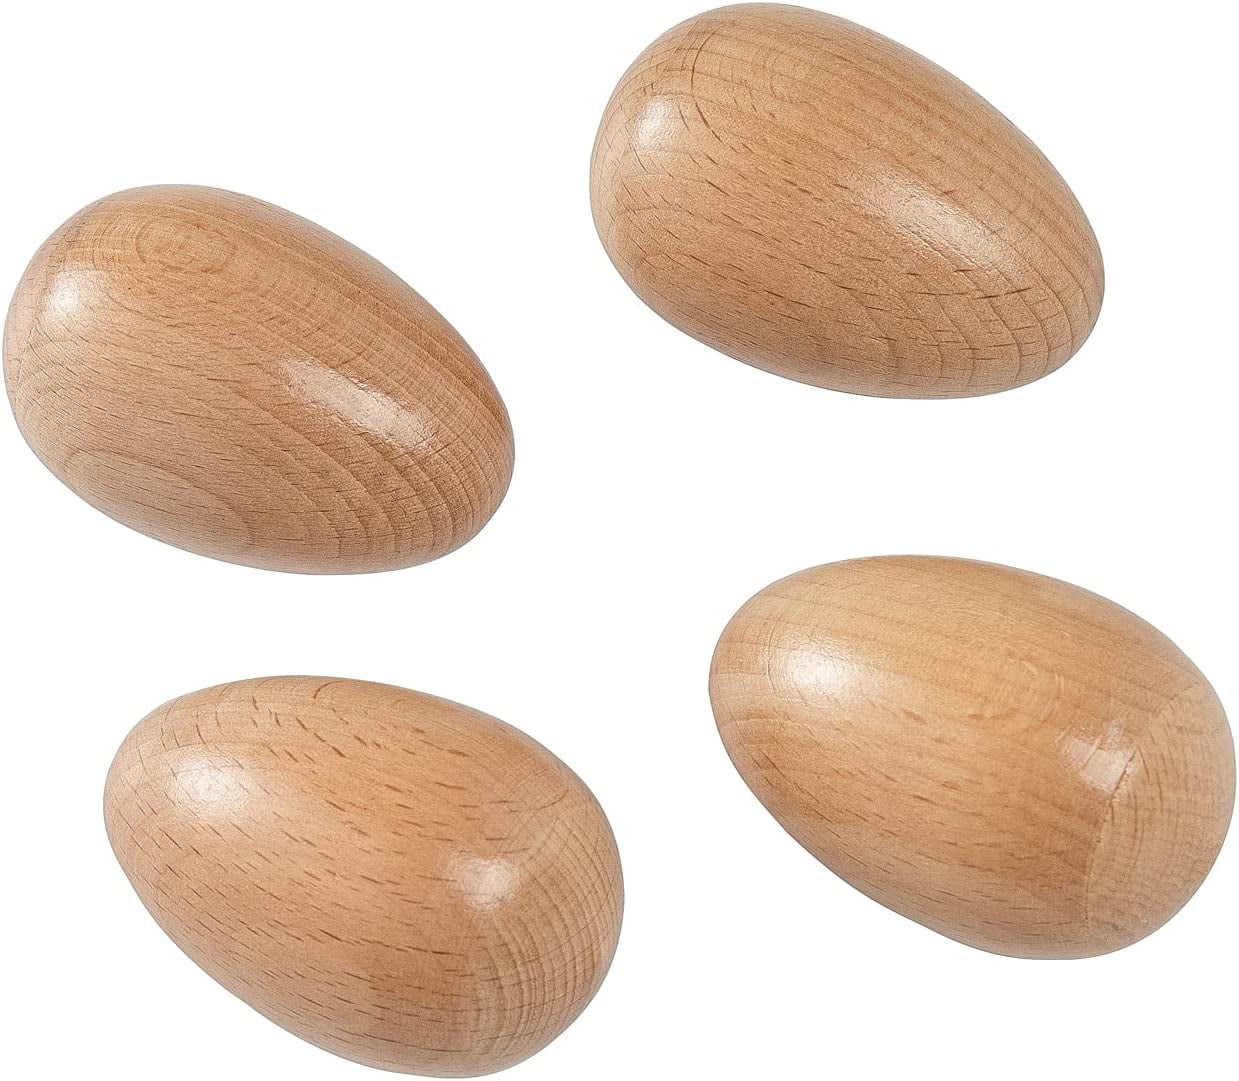 Eggs　Classroom　Wood　Musical　Party　(Natural　4pcs　Egg　for　Instrument　Percussion　Maracas　Prizes　Shakers　Wooden　Education　Wood)　Shakers,　Hand